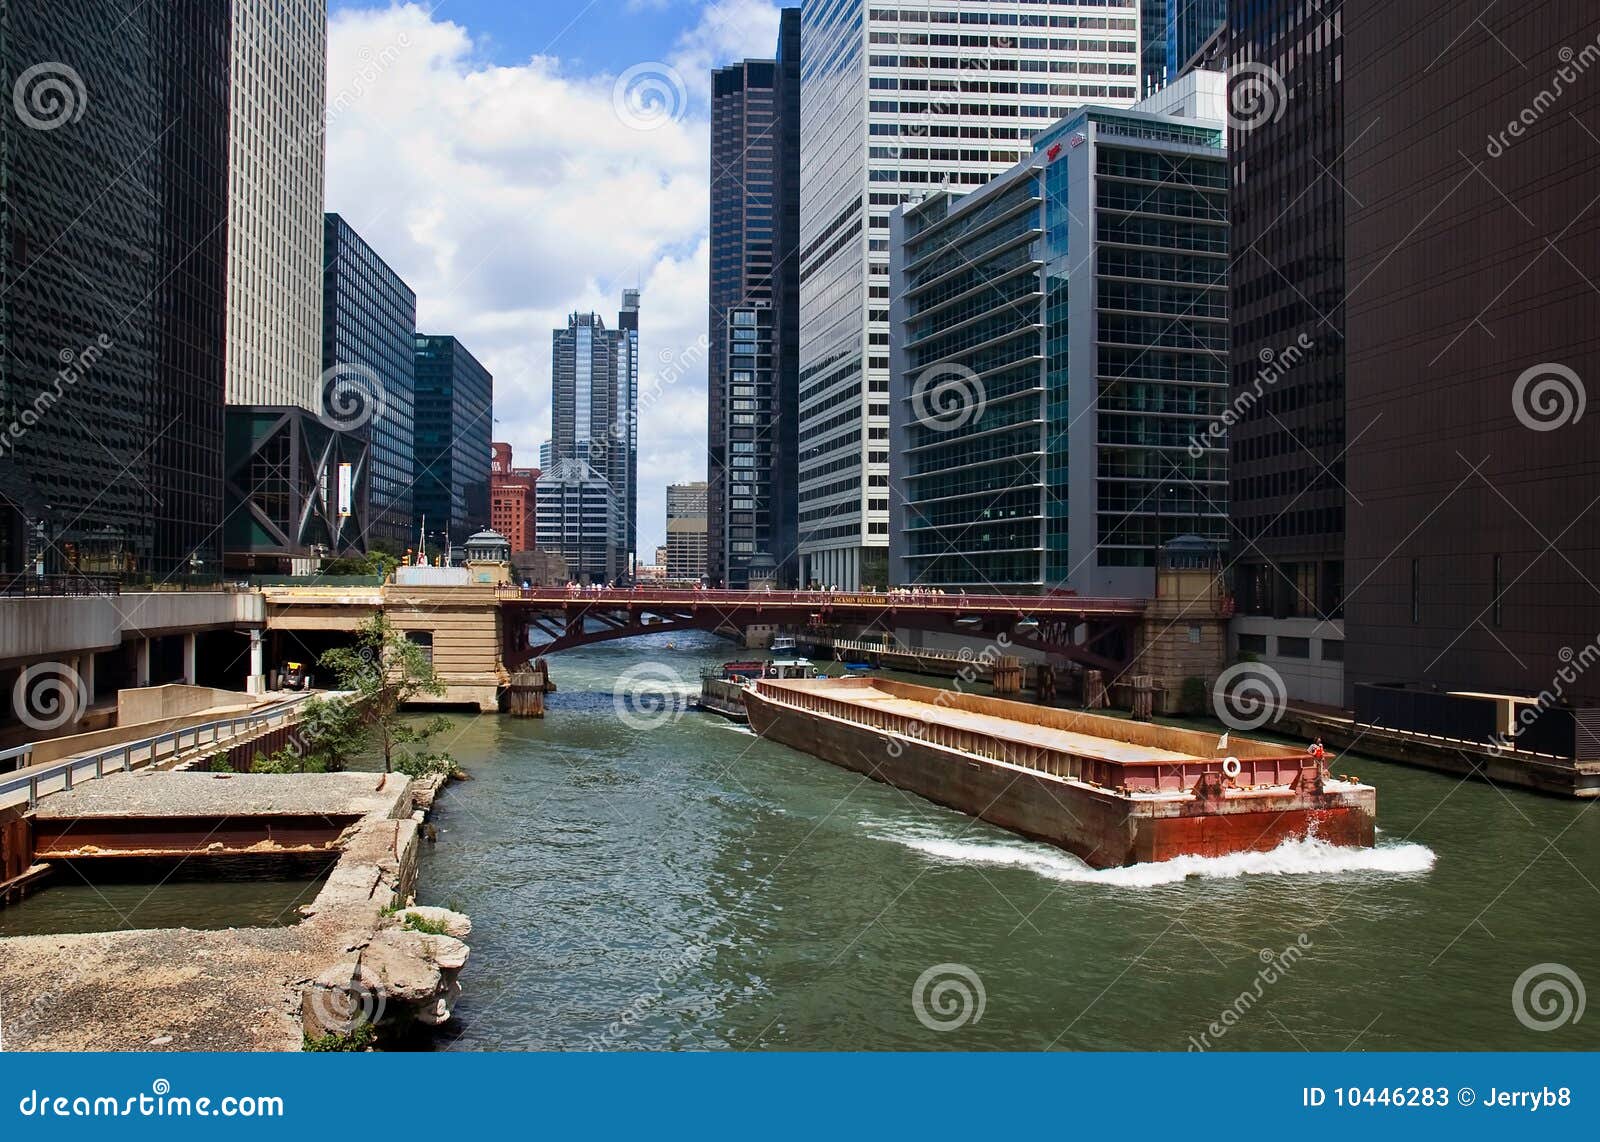 downtown chicago waterway